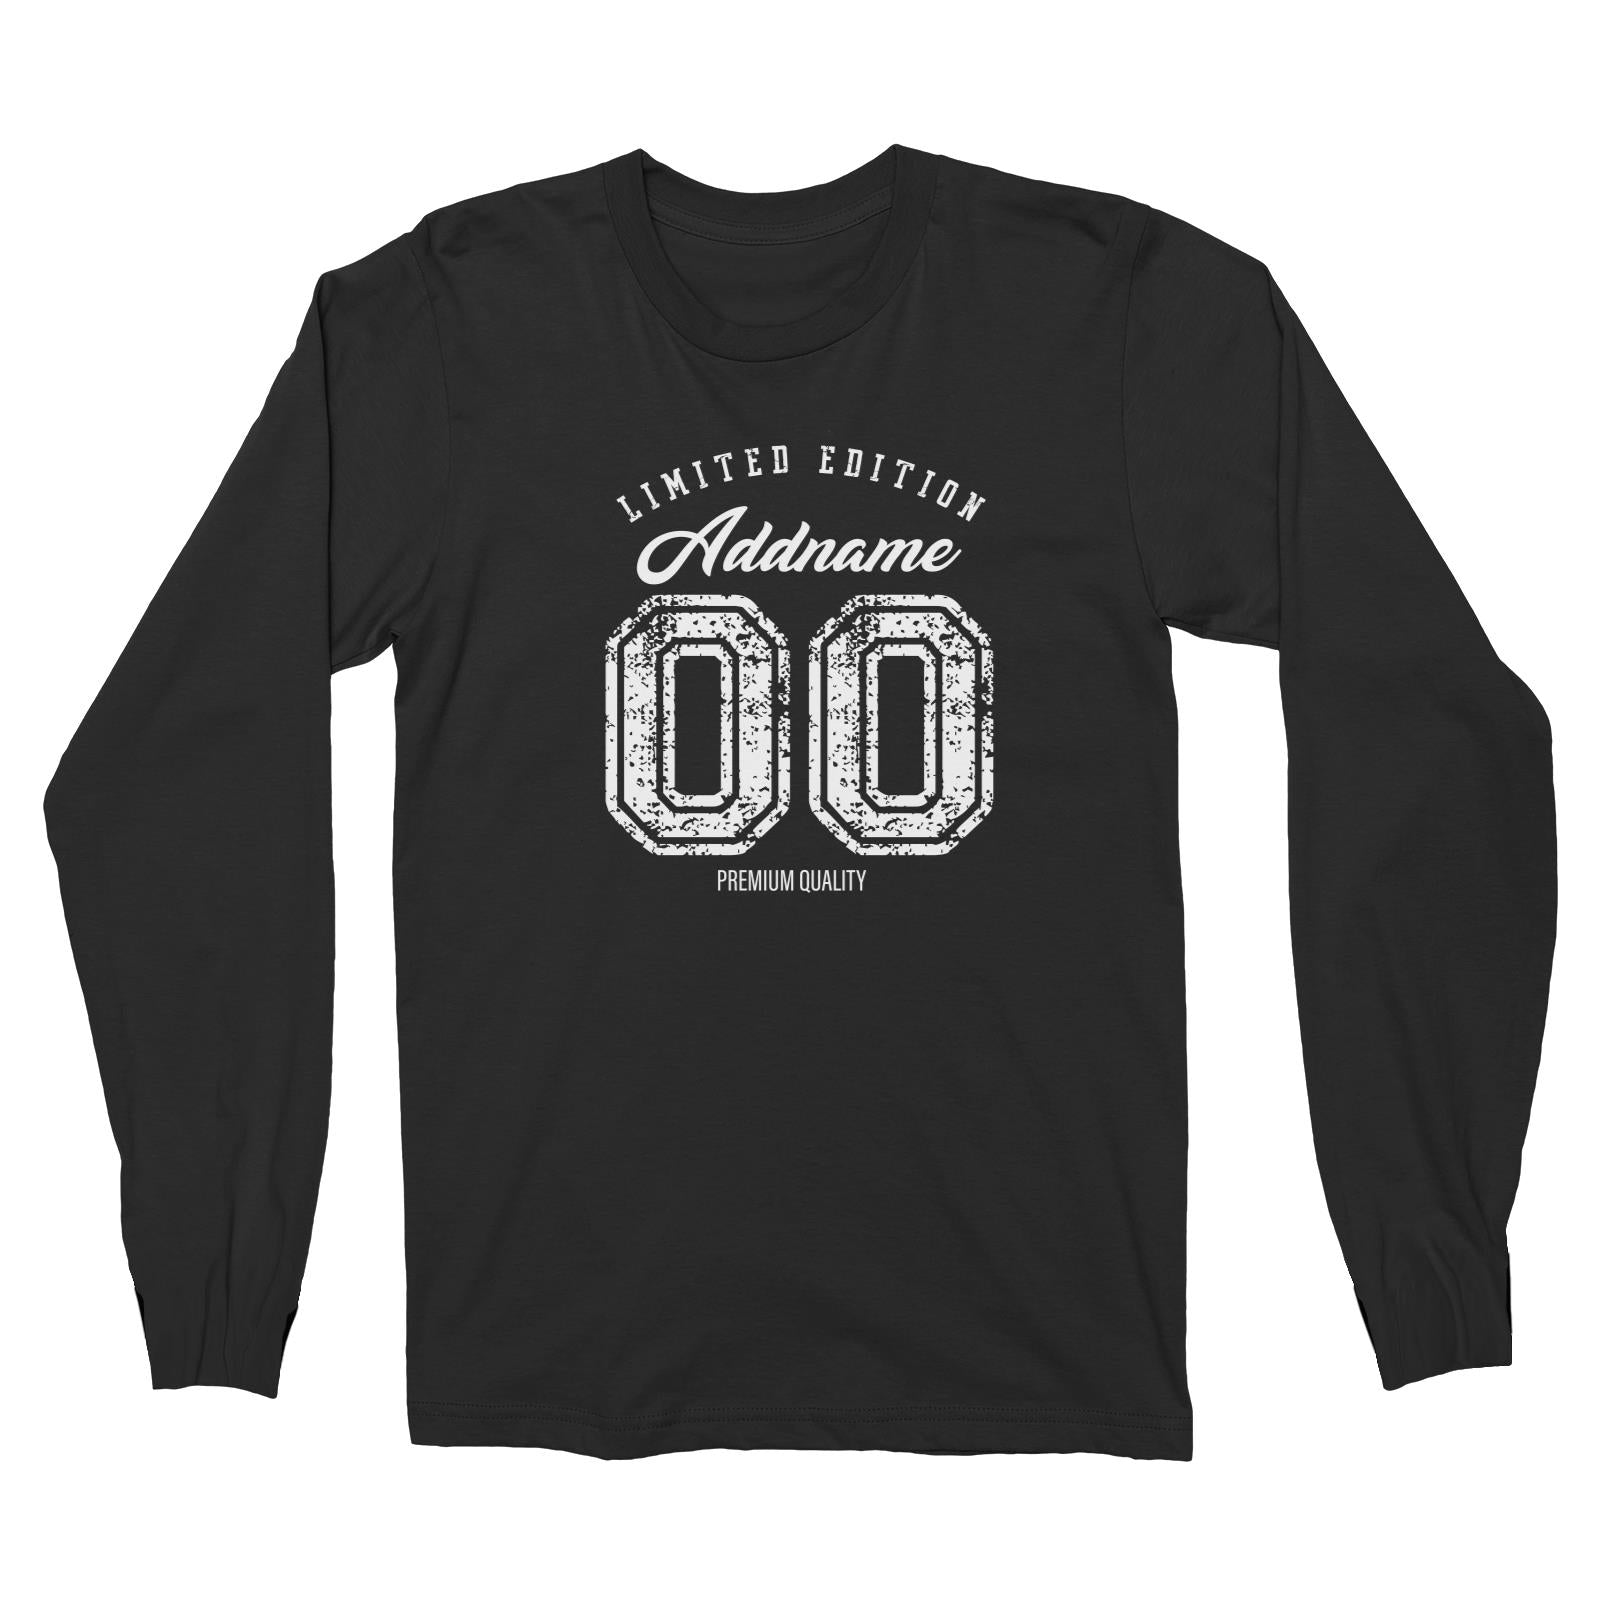 Limited Edition Premium Quality Personalizable with Name and Number Long Sleeve Unisex T-Shirt